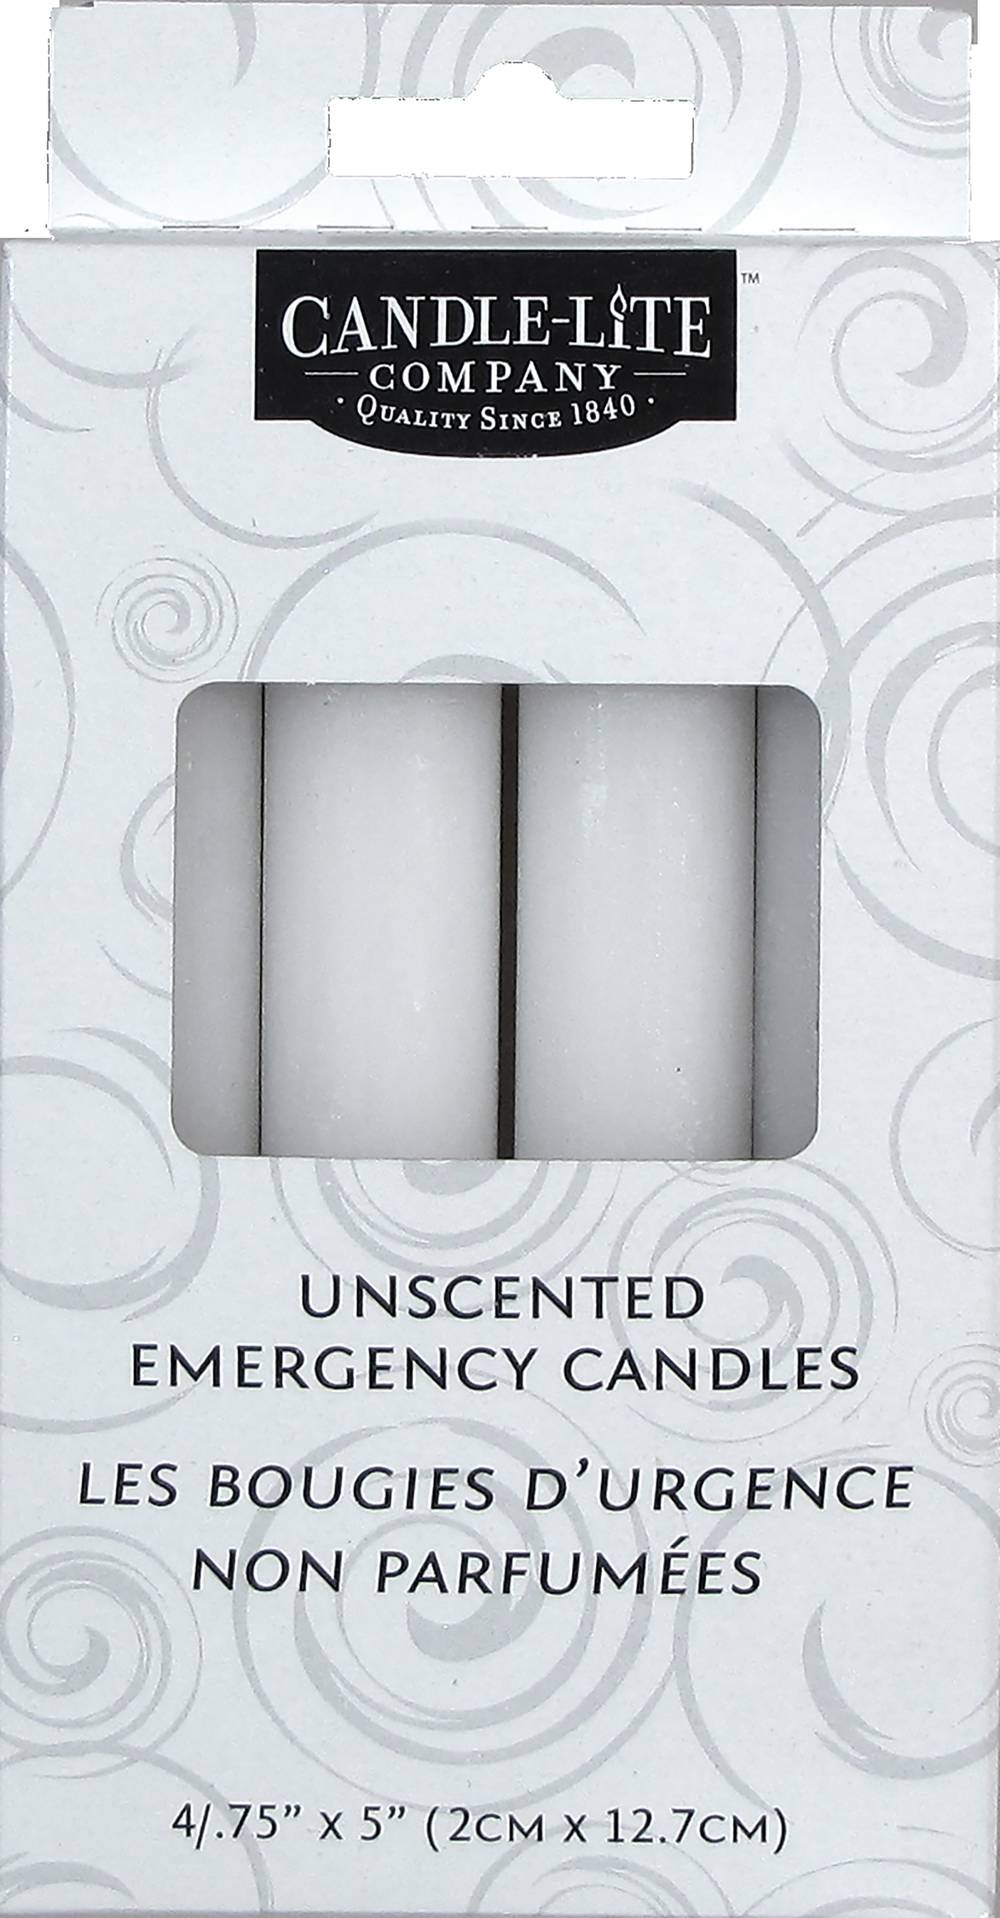 Candle-lite Emergency Candles, Unscented, 0.75 x 5 inch - 4 ct